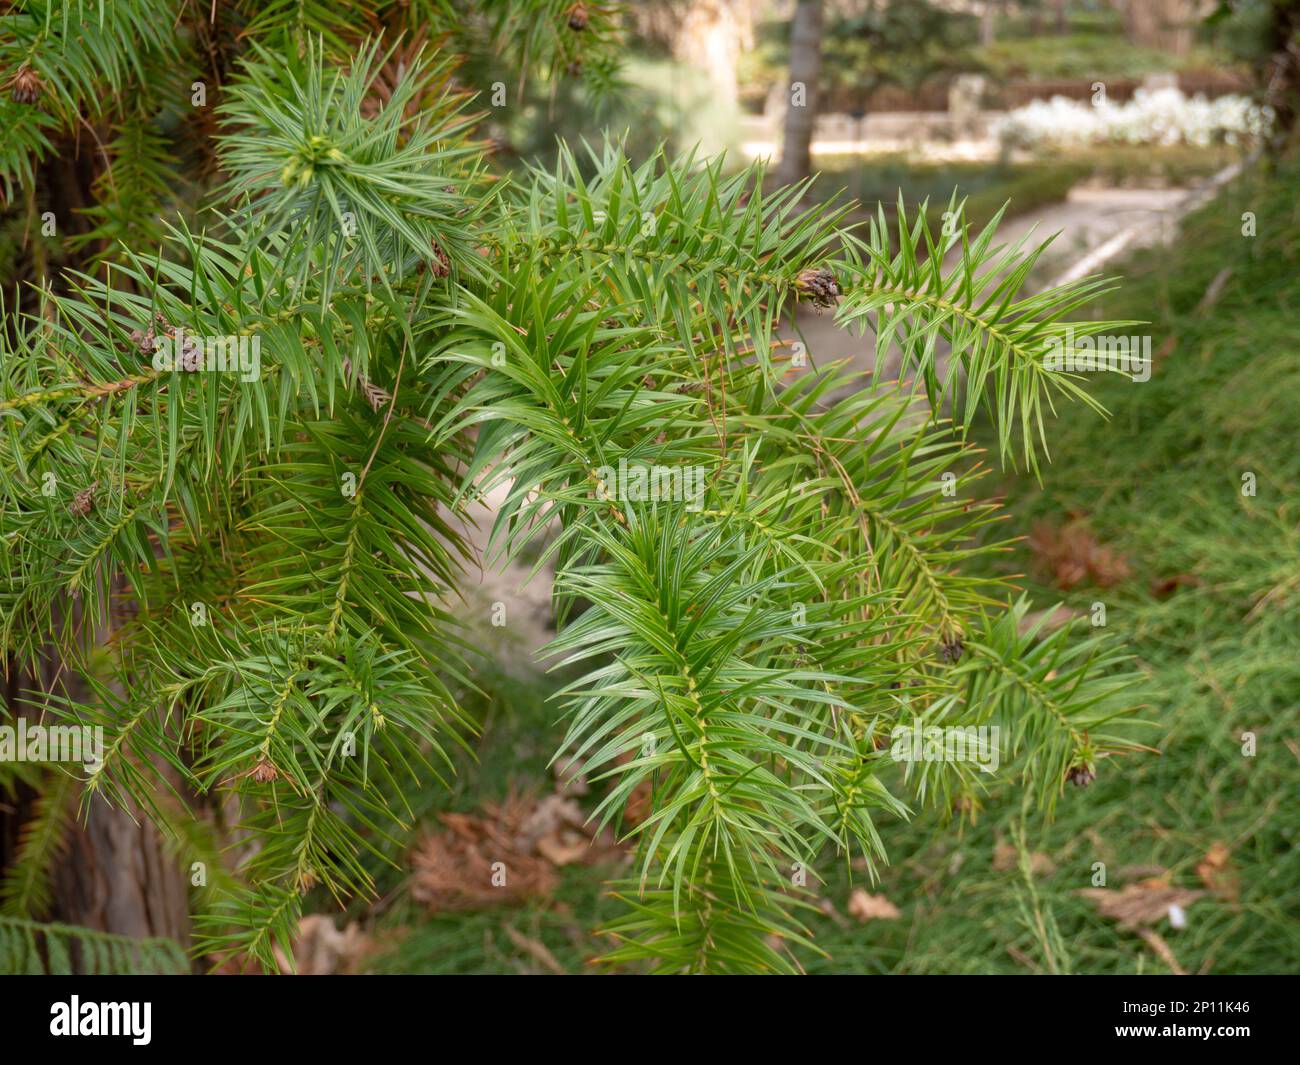 Cunninghamia lanceolata or Chinese fir conifer tree in the cypress family, Cupressaceae. Spiral leaf arrangements of green lanceolate shaped leaves. Stock Photo